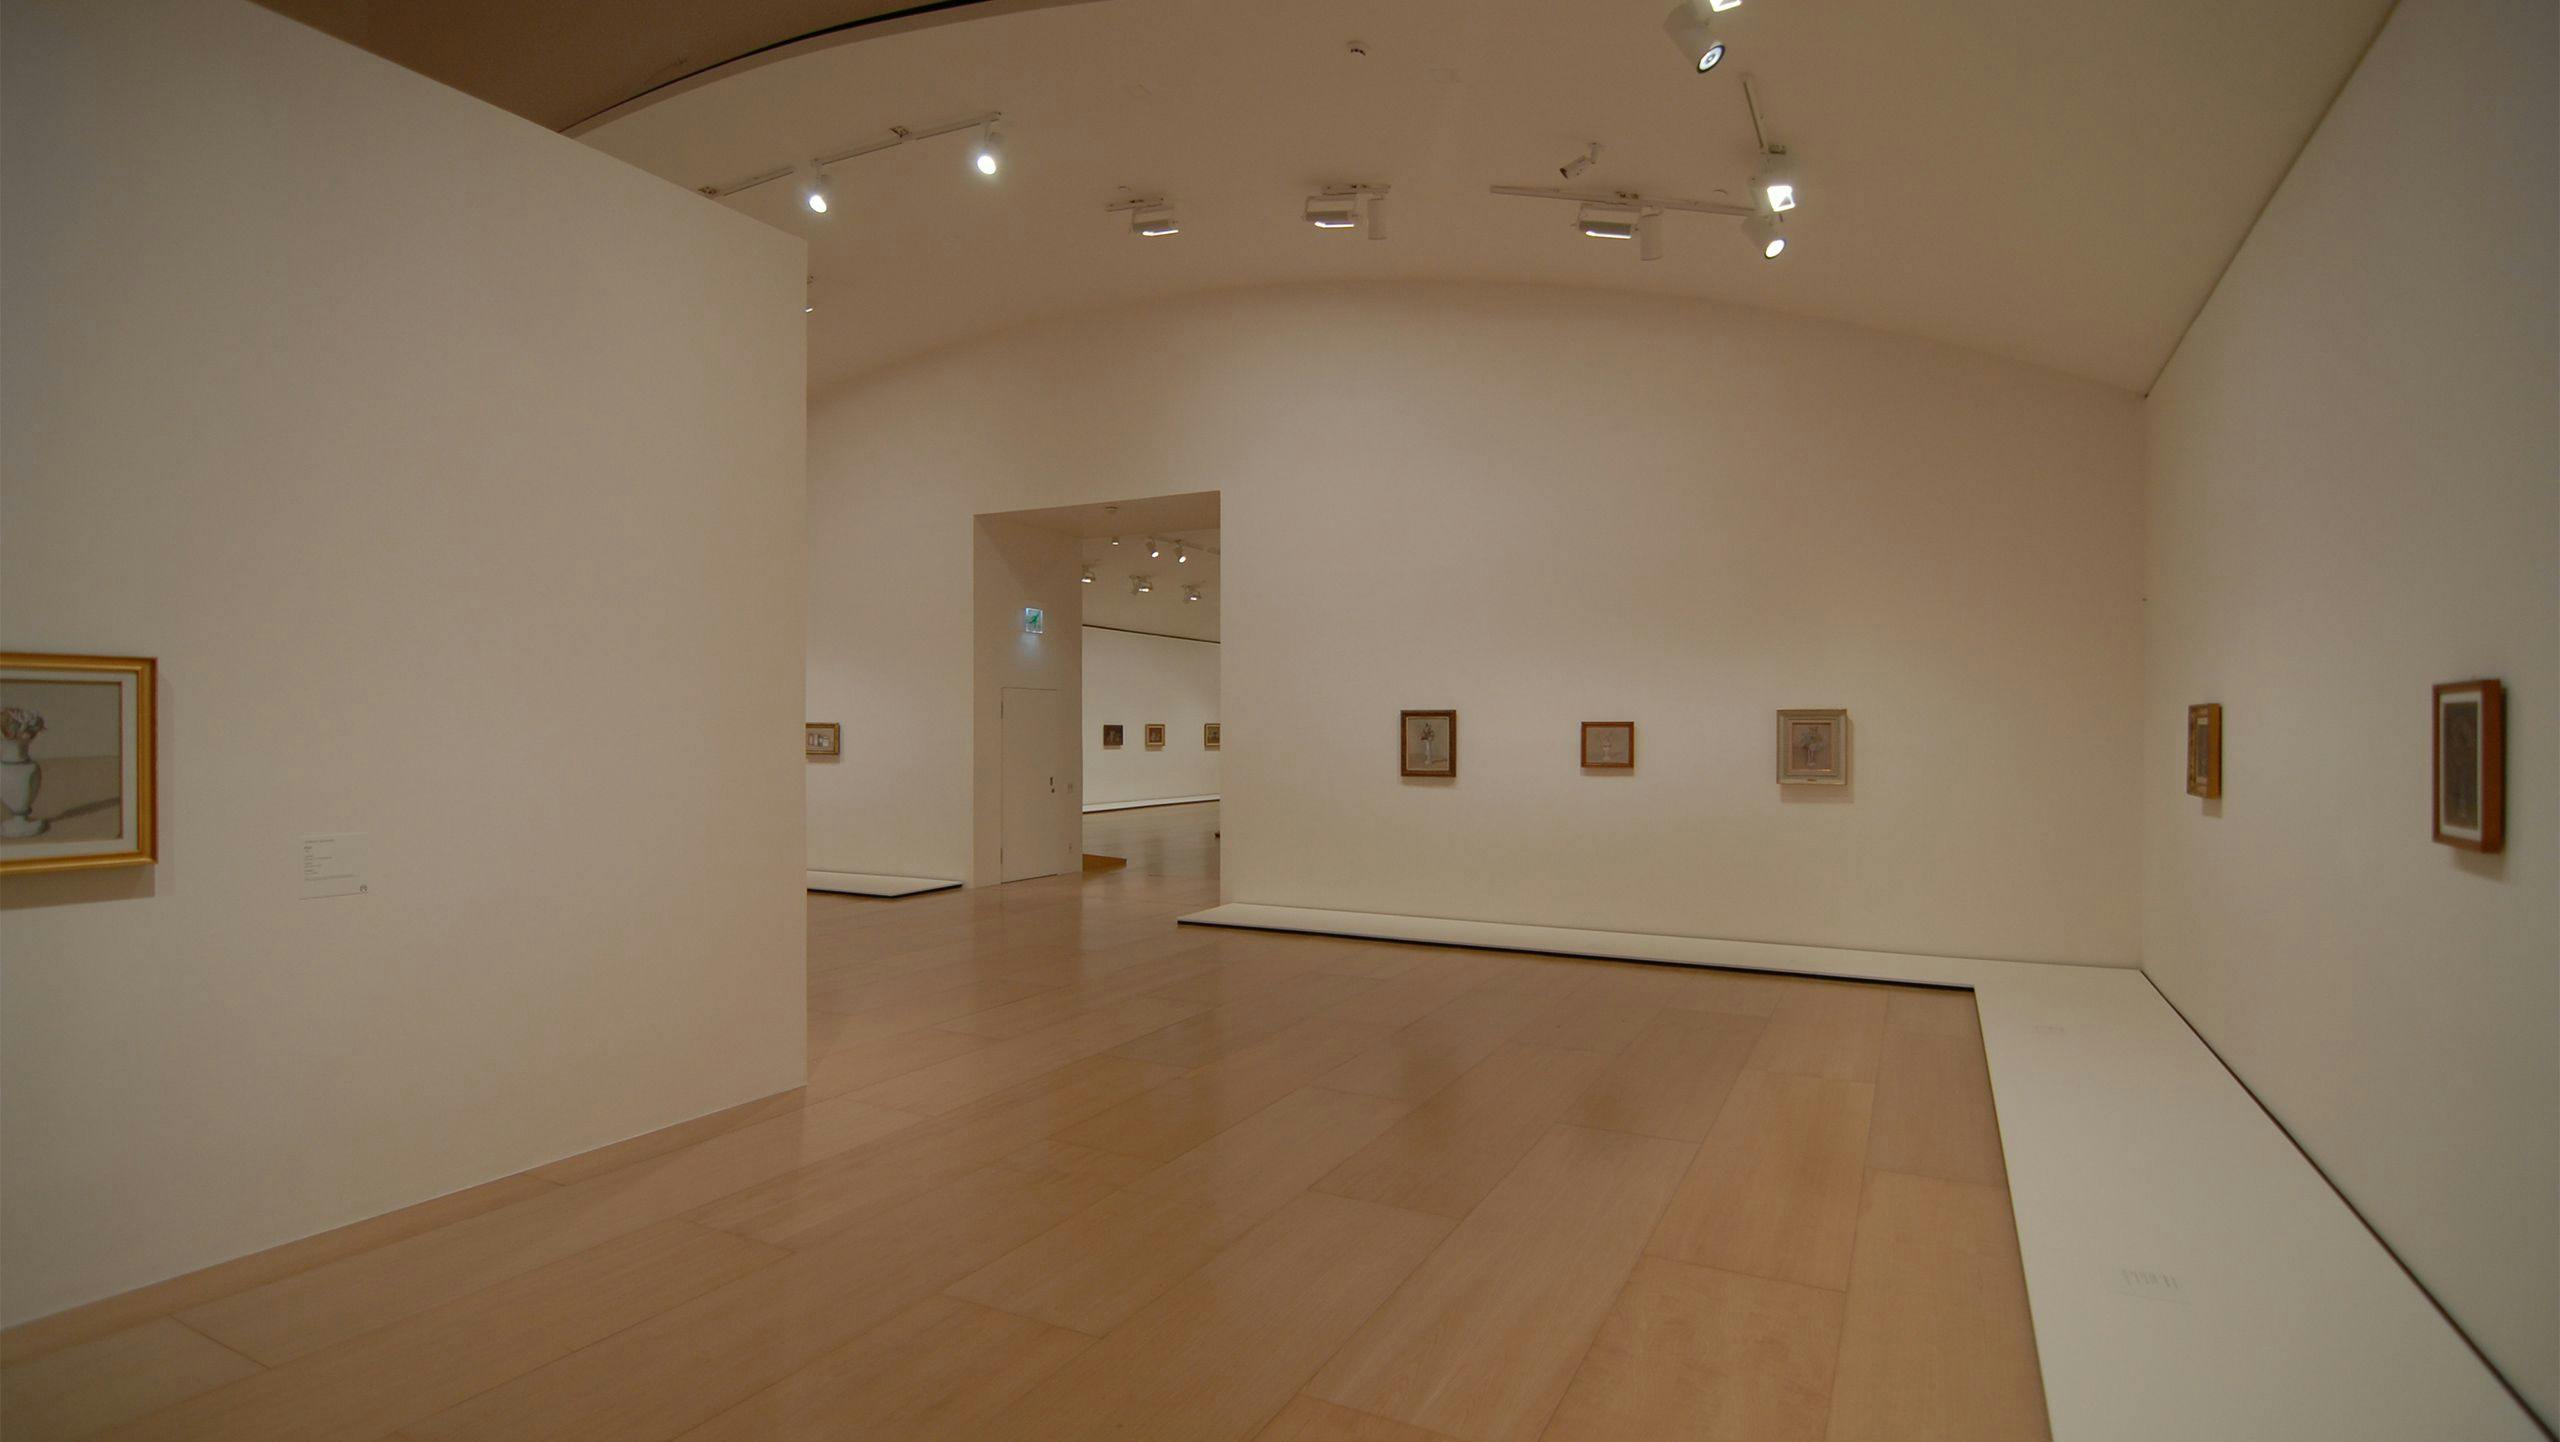 Installation view of the exhibition, A Backward Glance: Giorgio Morandi and the Old Masters, at the Guggenheim Bilbao, dated 2019.